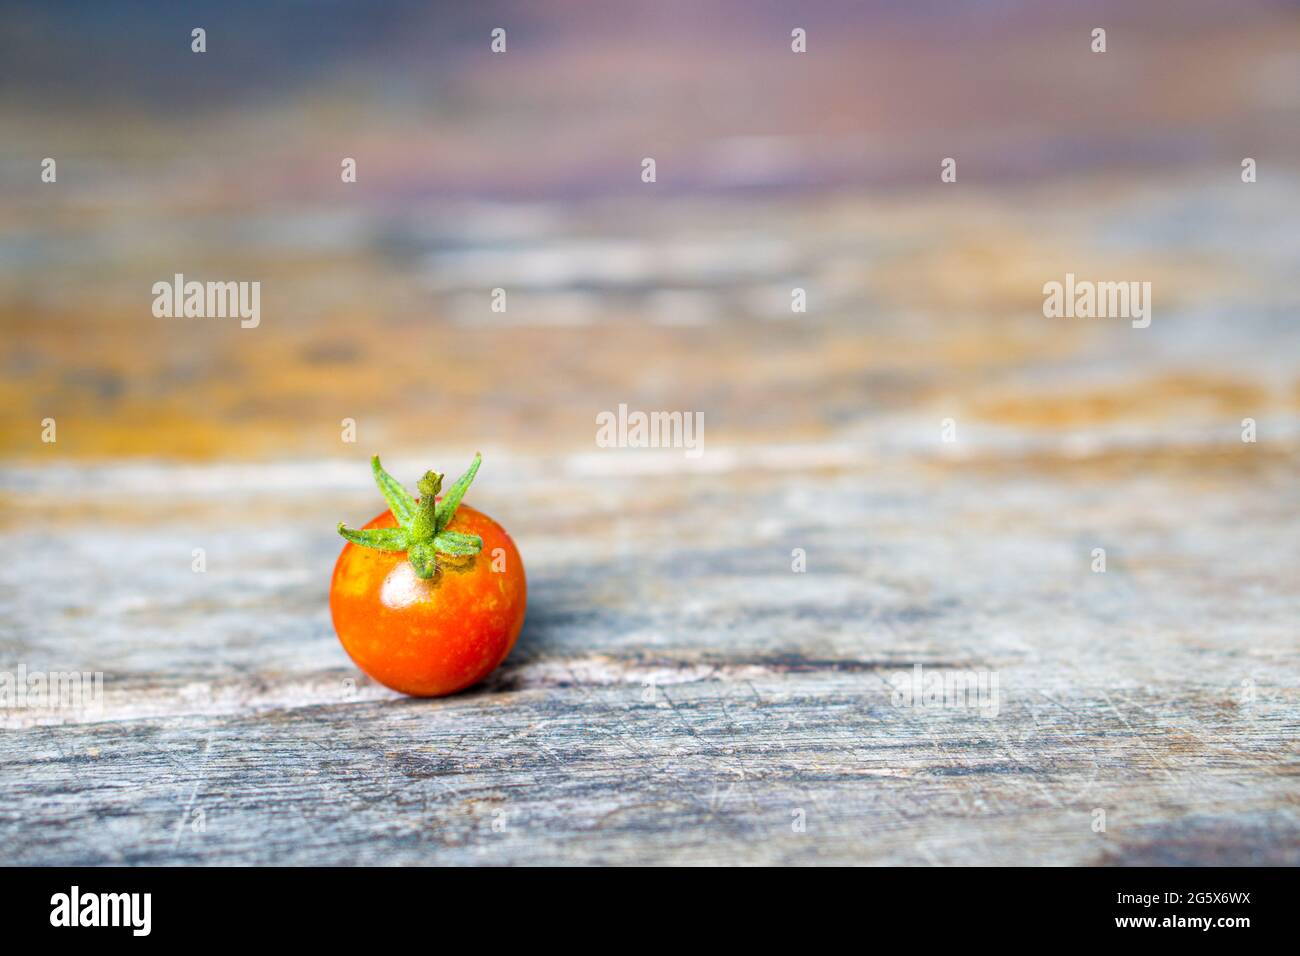 Fresh and small red tomato lying on a wooden table background. Stock Photo